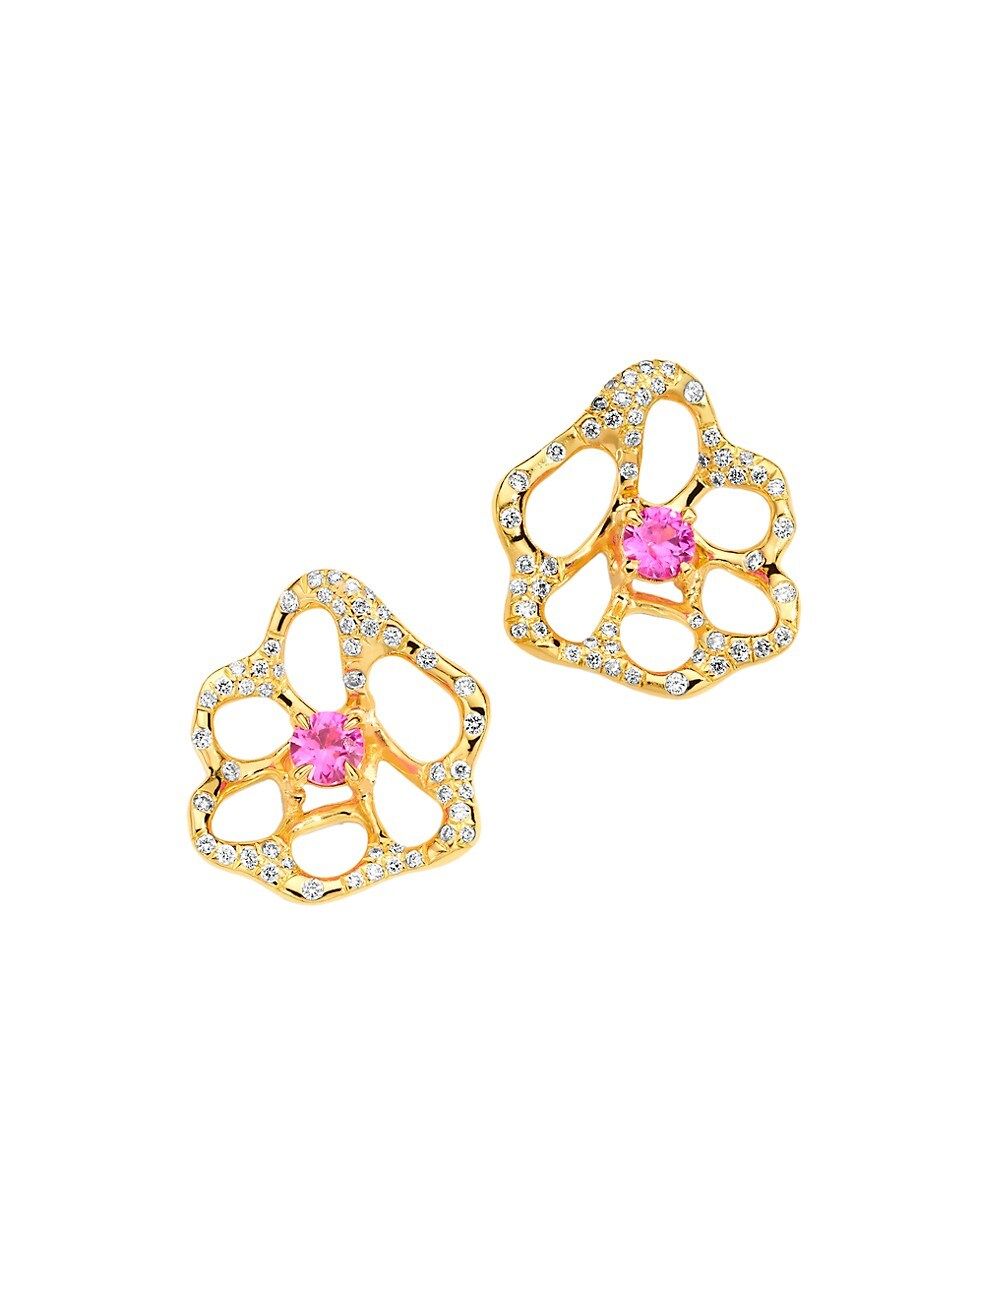 Stardust Drizzle Flora Small 18K Yellow Gold, Pink Sapphires & 0.30 Diamond Stud Earrings | Saks Fifth Avenue